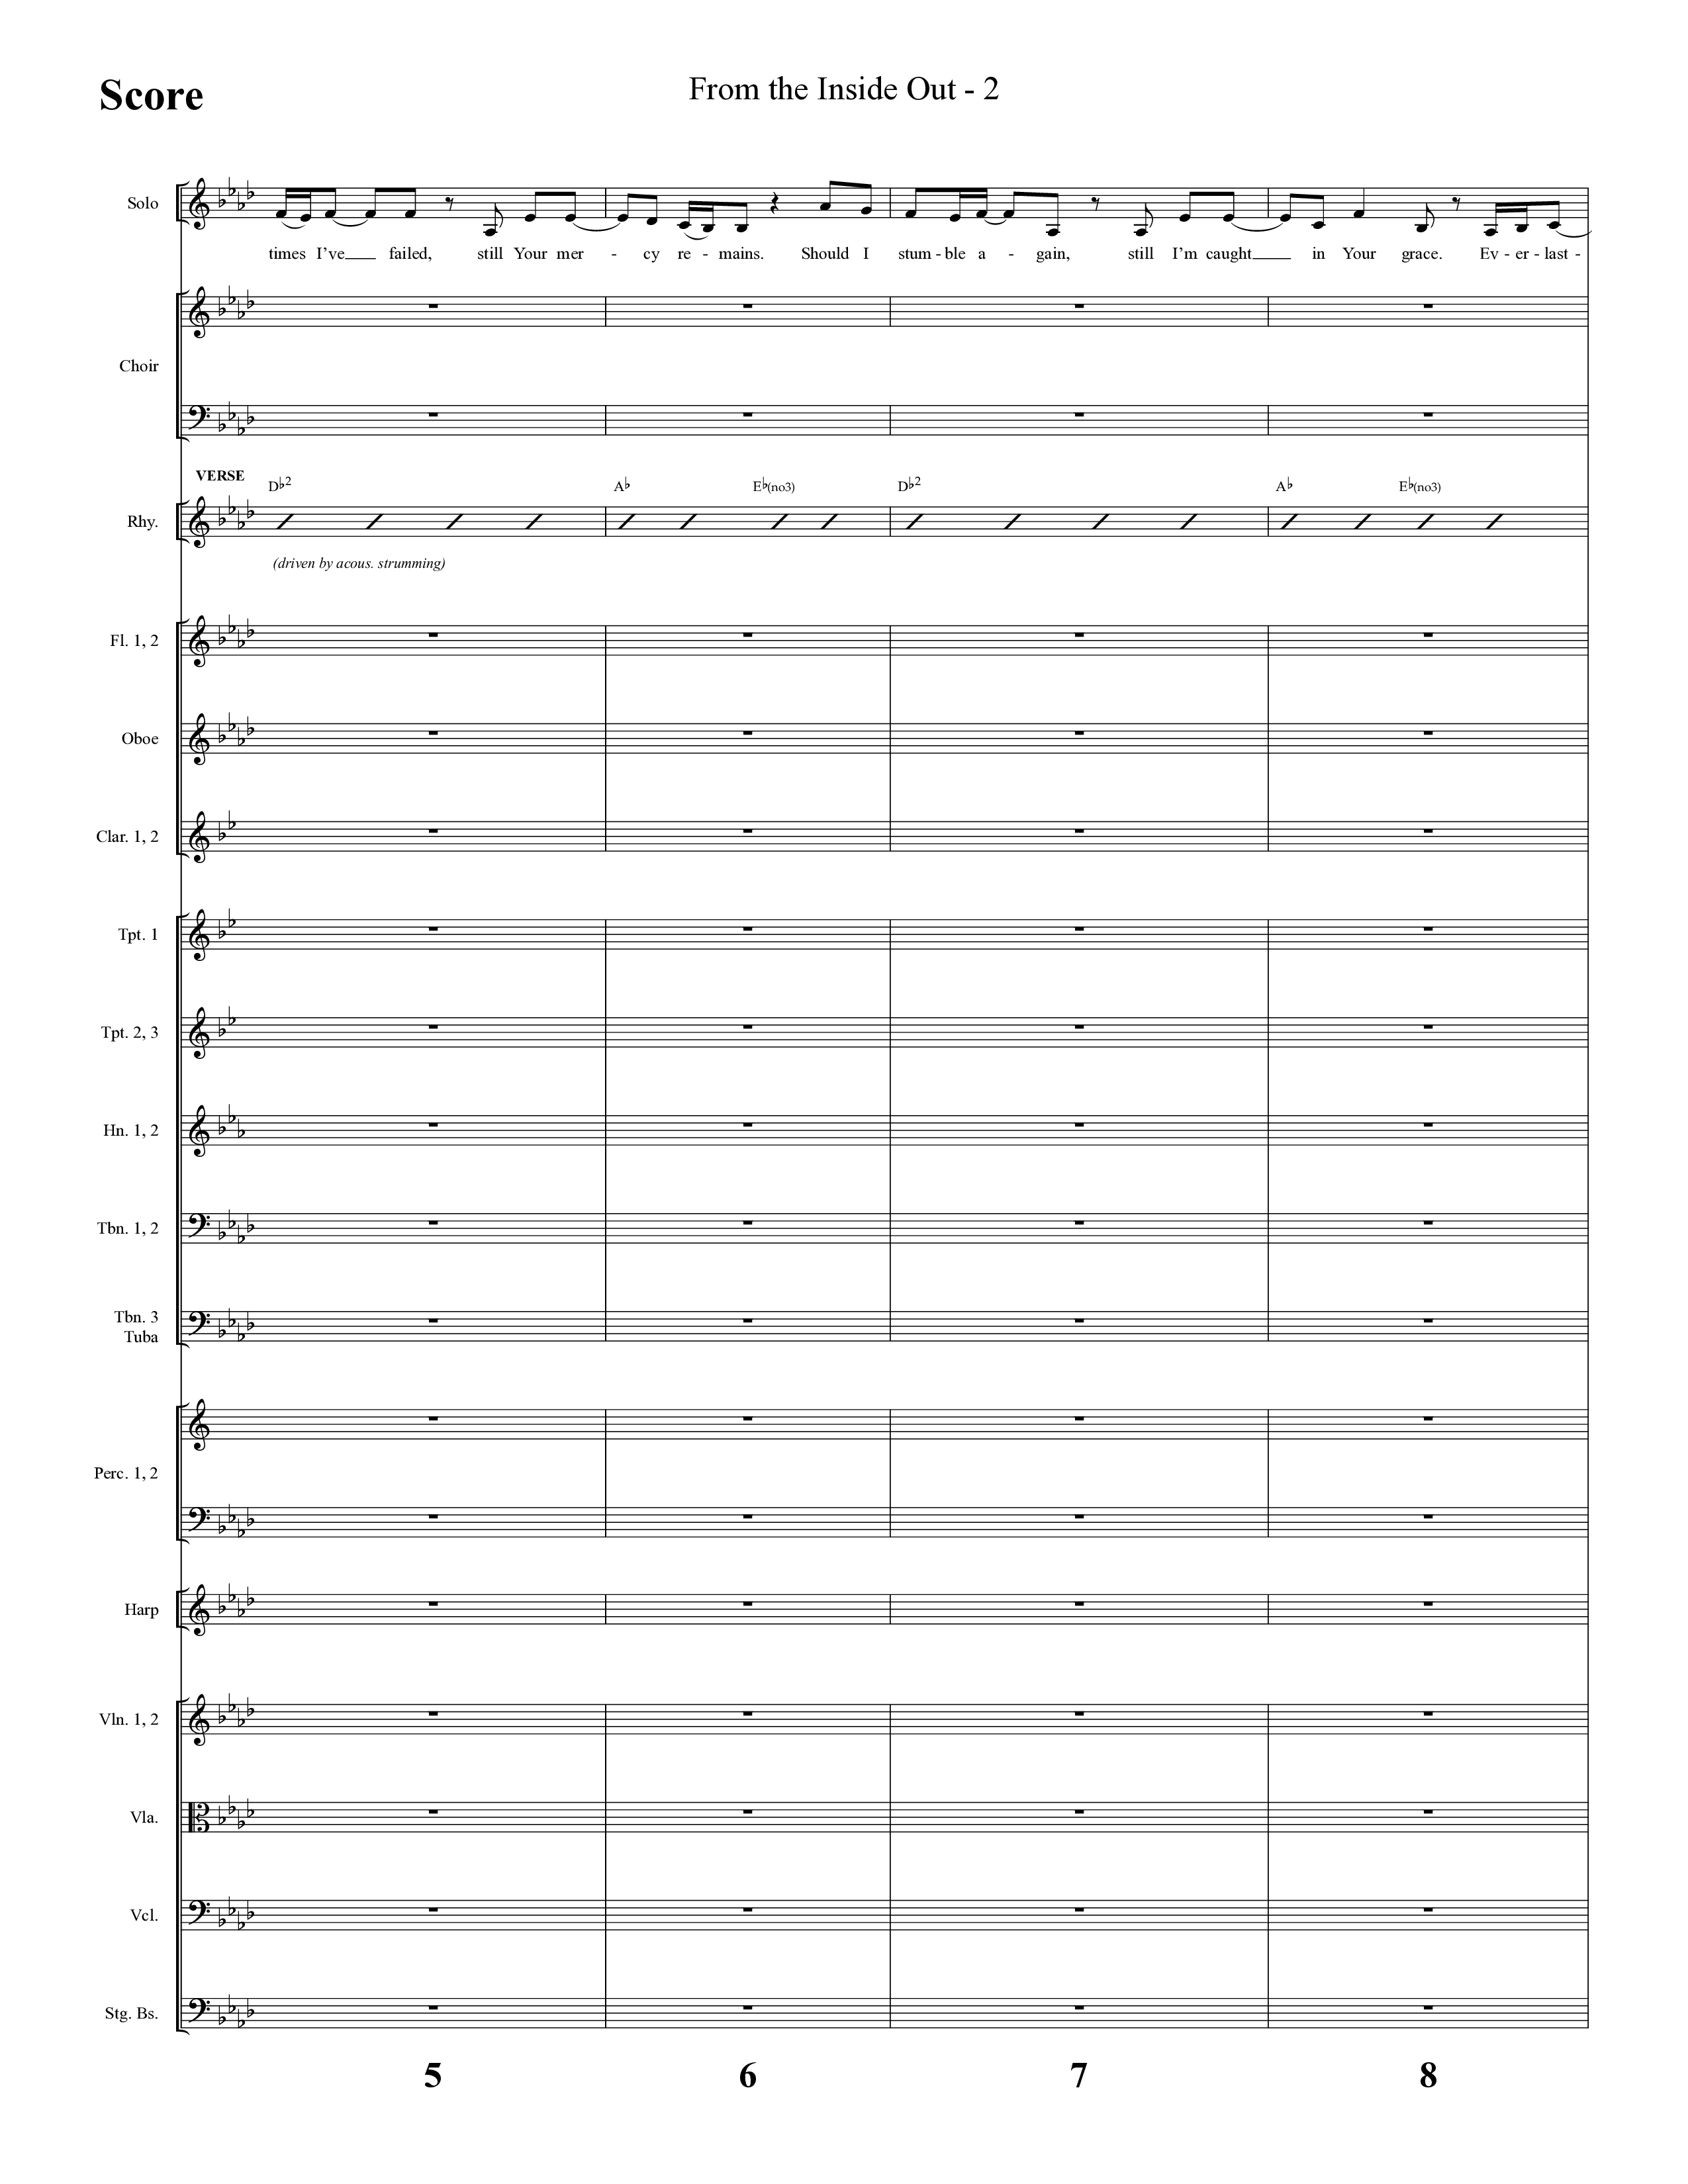 From The Inside Out (Choral Anthem SATB) Conductor's Score (Lifeway Choral / Arr. Cliff Duren)